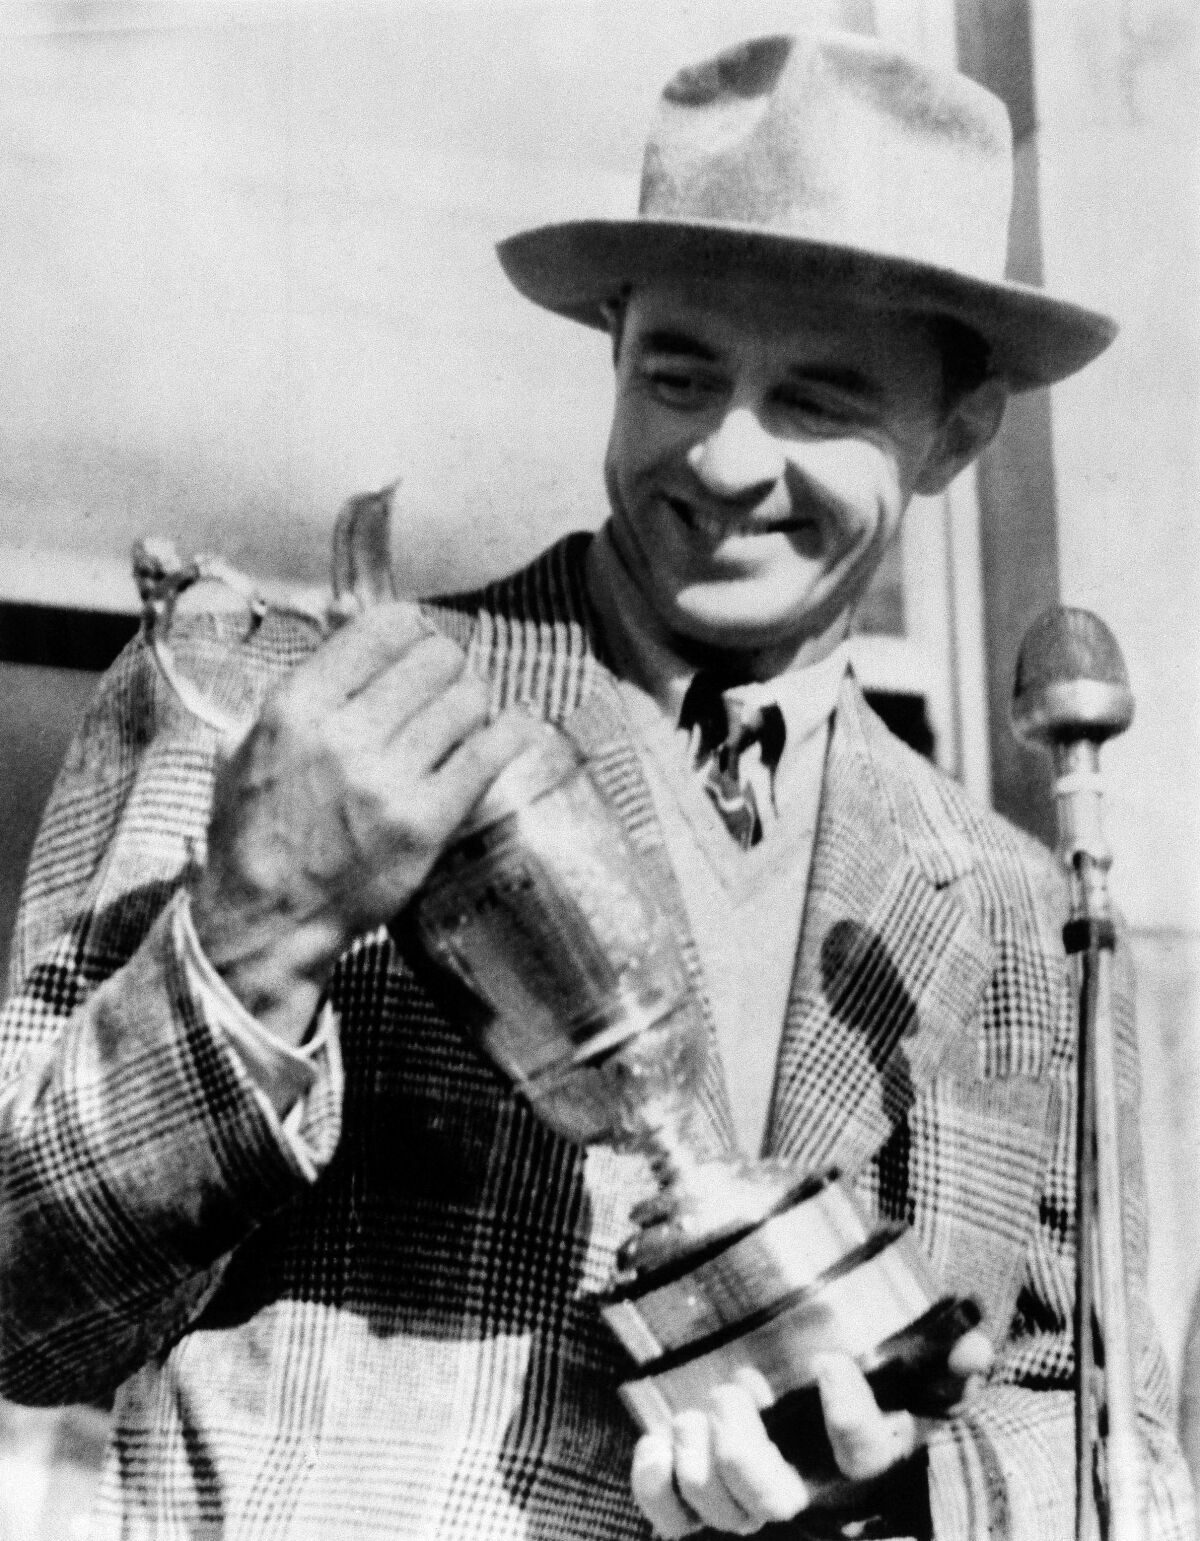 FILE - In this July 5, 1946, file photo, Sam Snead, holds the British Open Golf Championship Trophy he won at St. Andrews, Scotland with a 72-hole score of 290. Snead, who won 75 years ago, did not return to the British Open until 1962. (AP Photo/File)